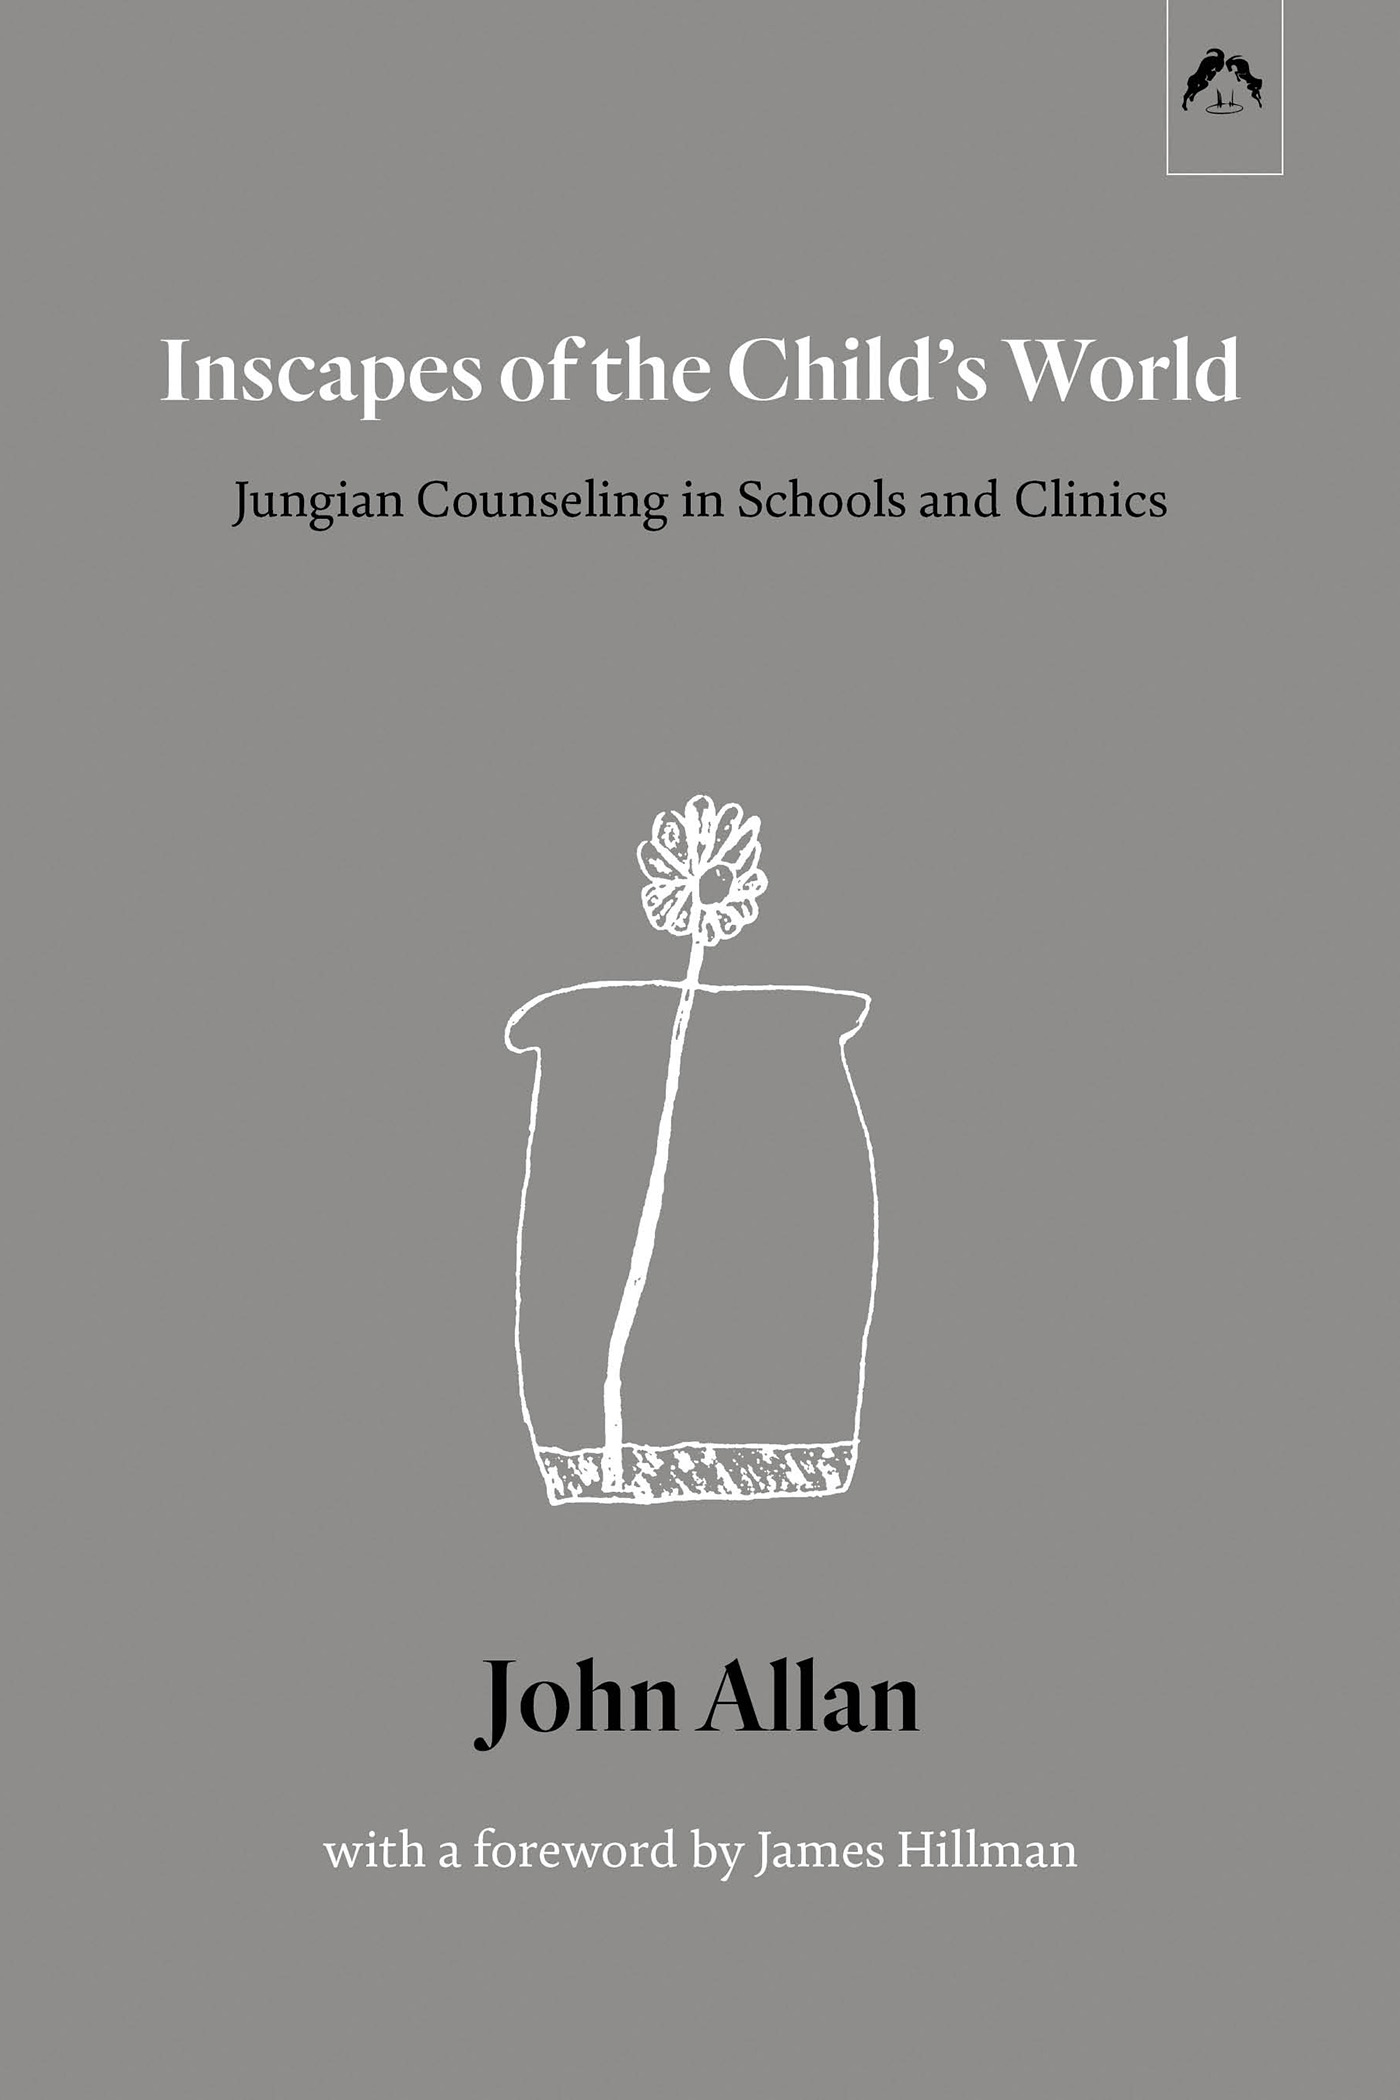 Inscapes of the Child's World